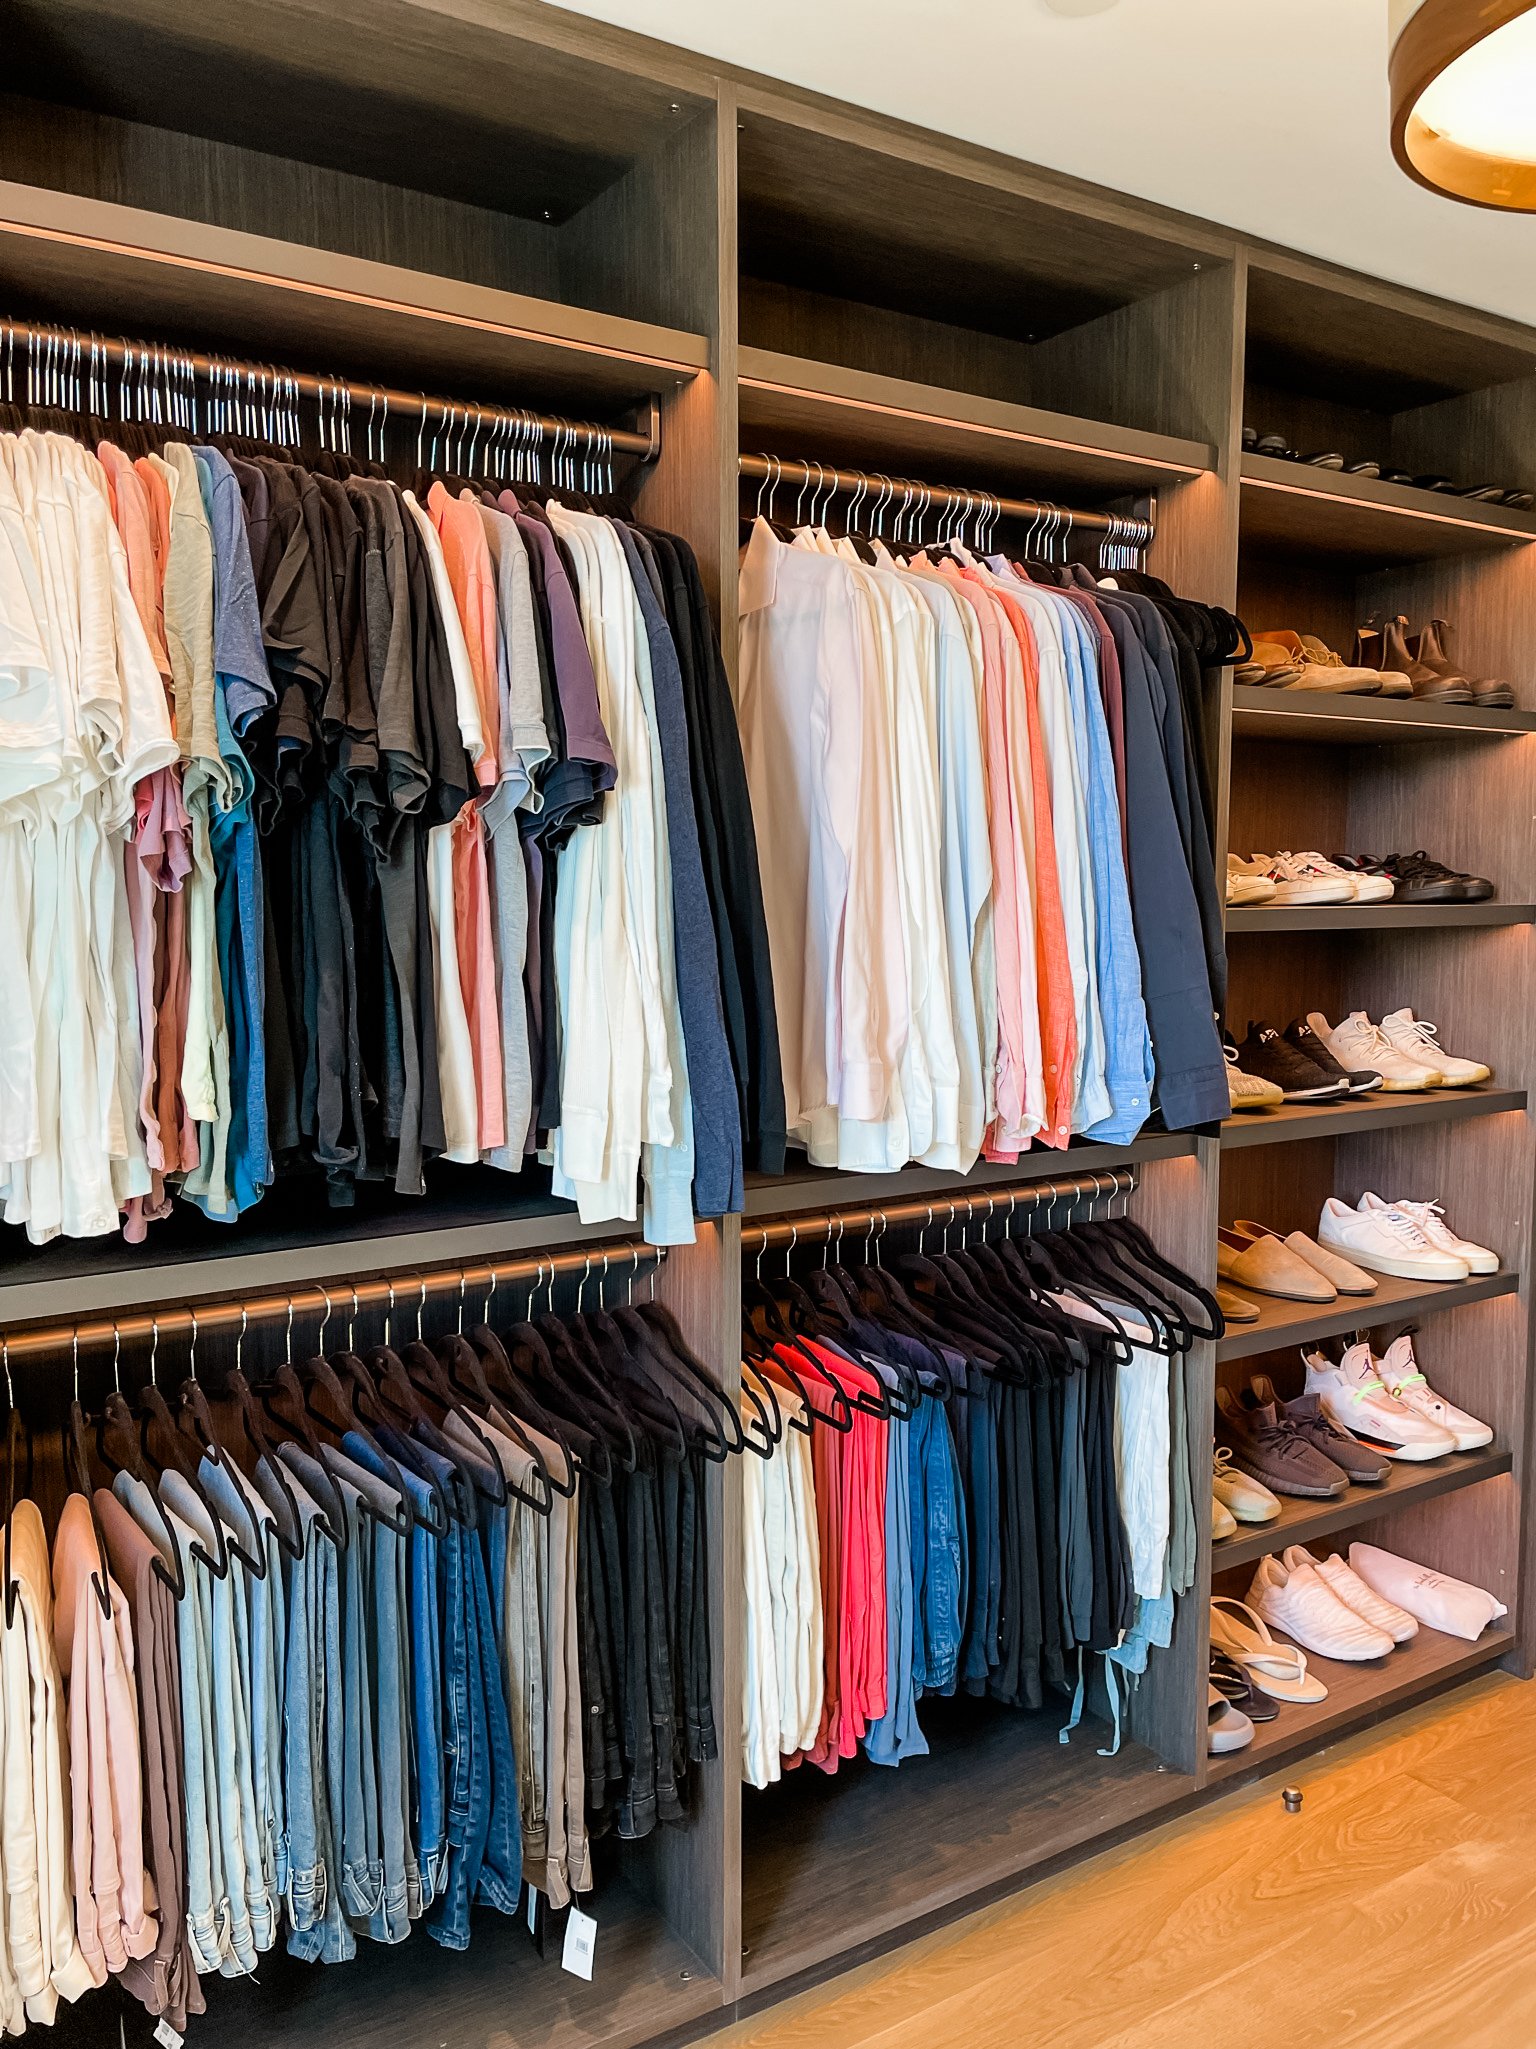 How to Better Organize Your Closet - Tips From a Professional